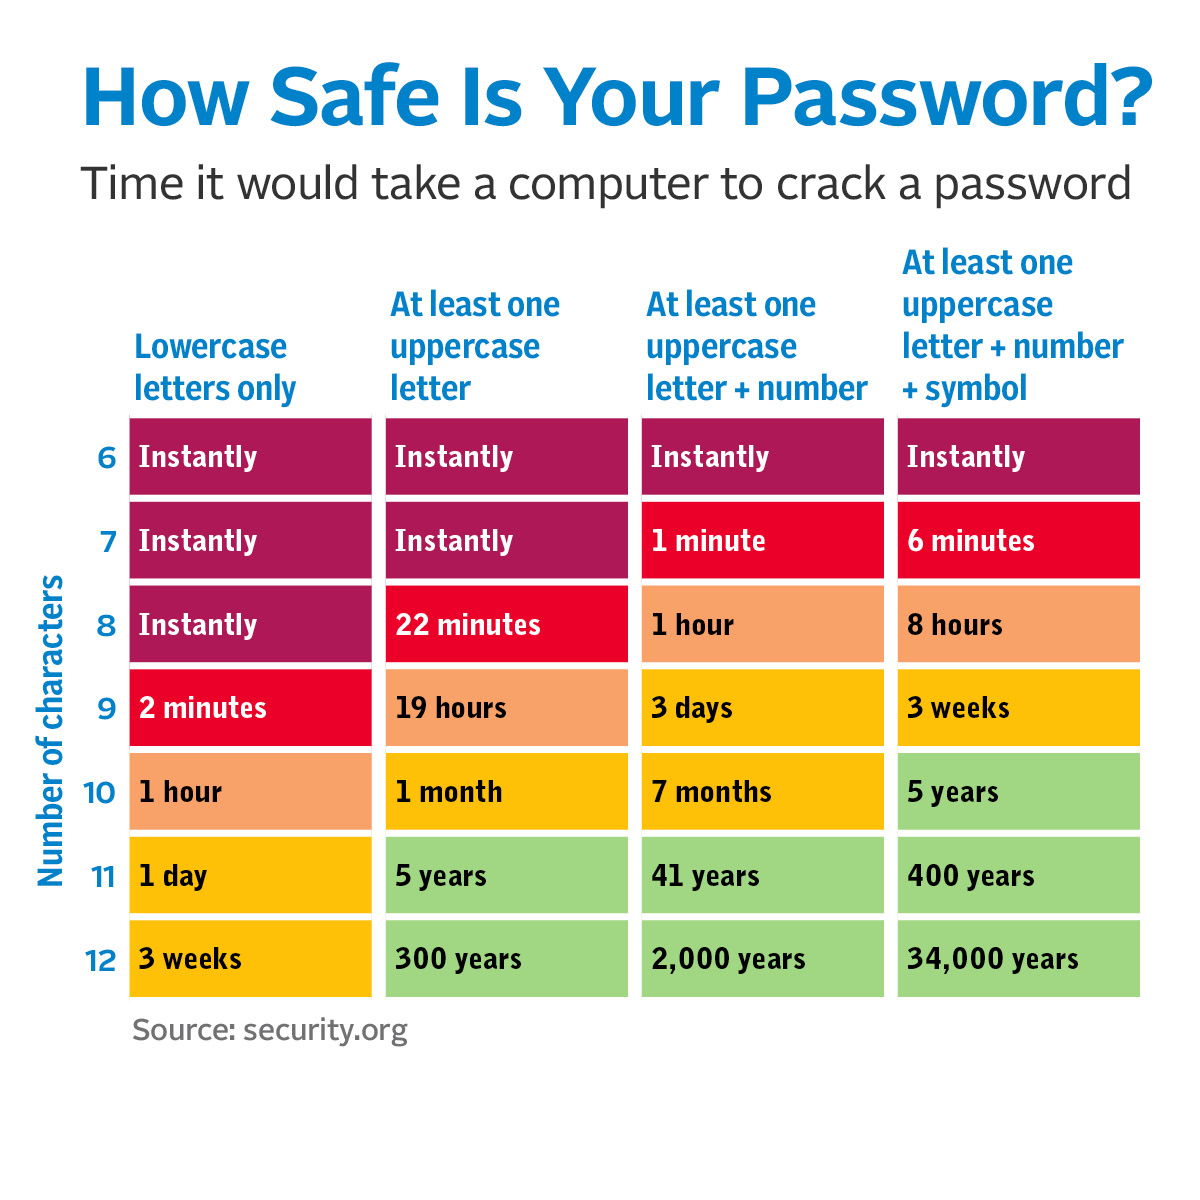 A chart showing the time it would take a computer to crack passwords of varying complexity.